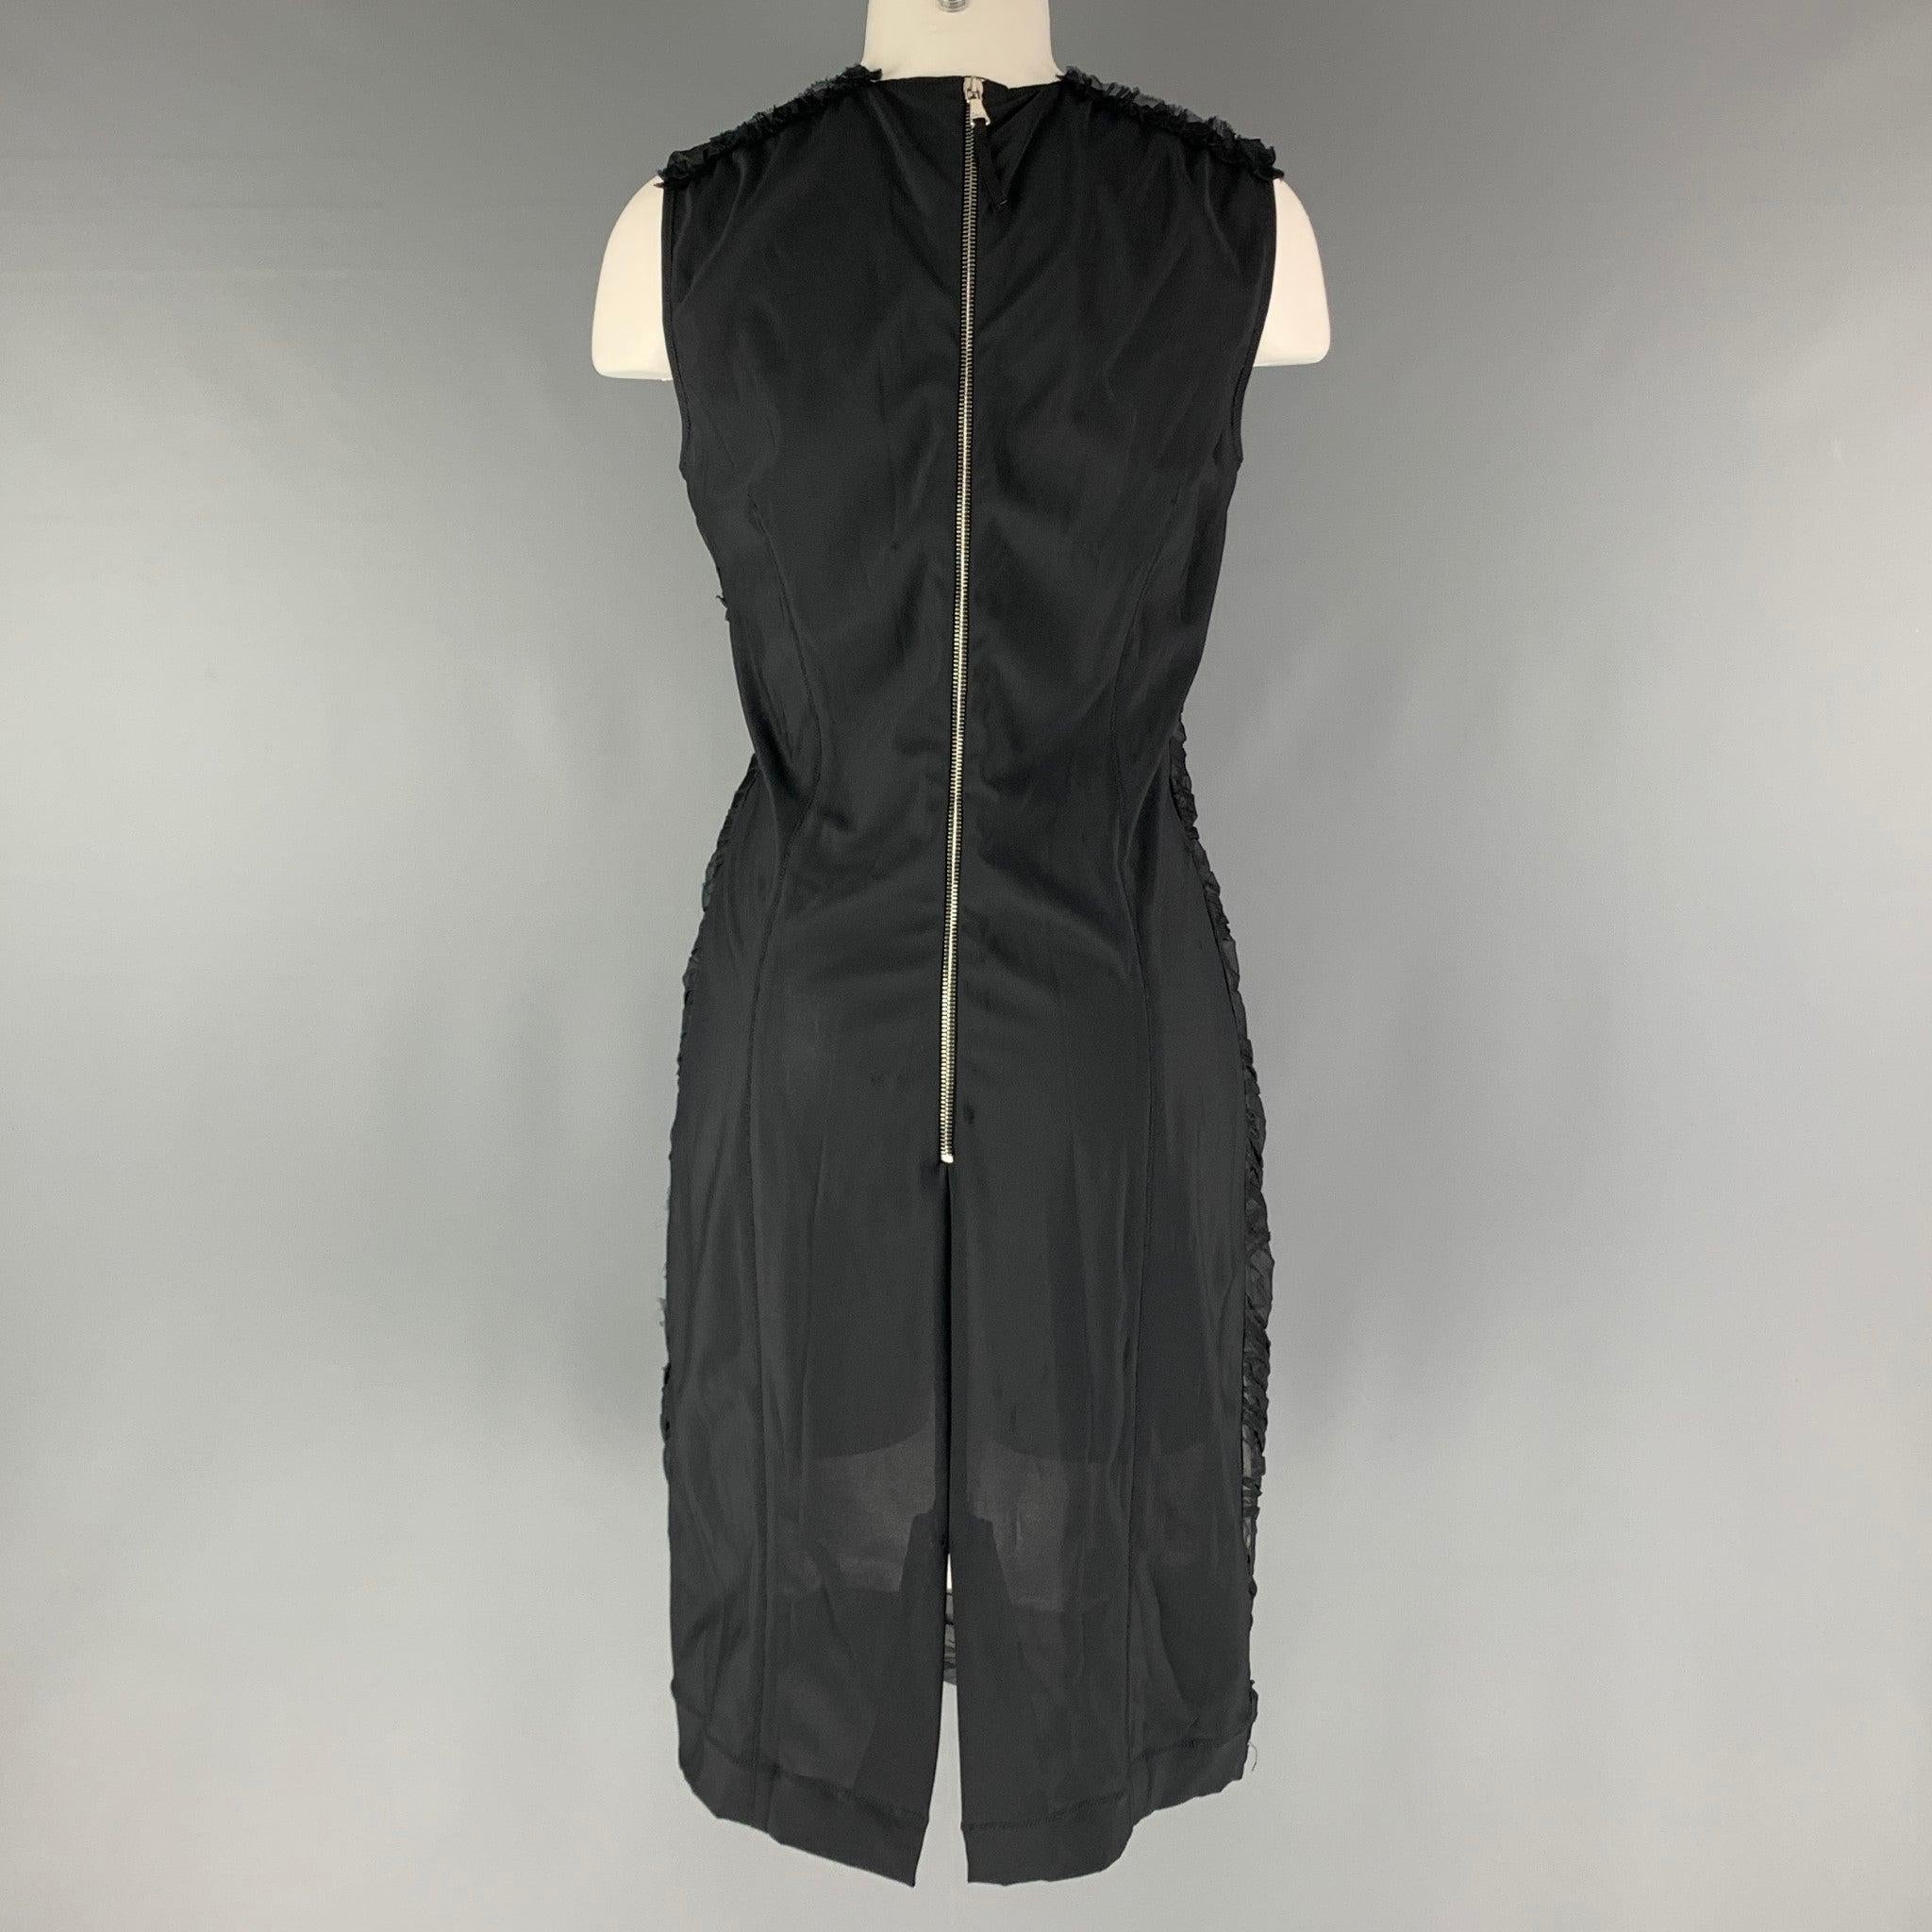 D&G by DOLCE & GABBANA Size 8 Black Nylon Ruched Shift Dress In Good Condition For Sale In San Francisco, CA